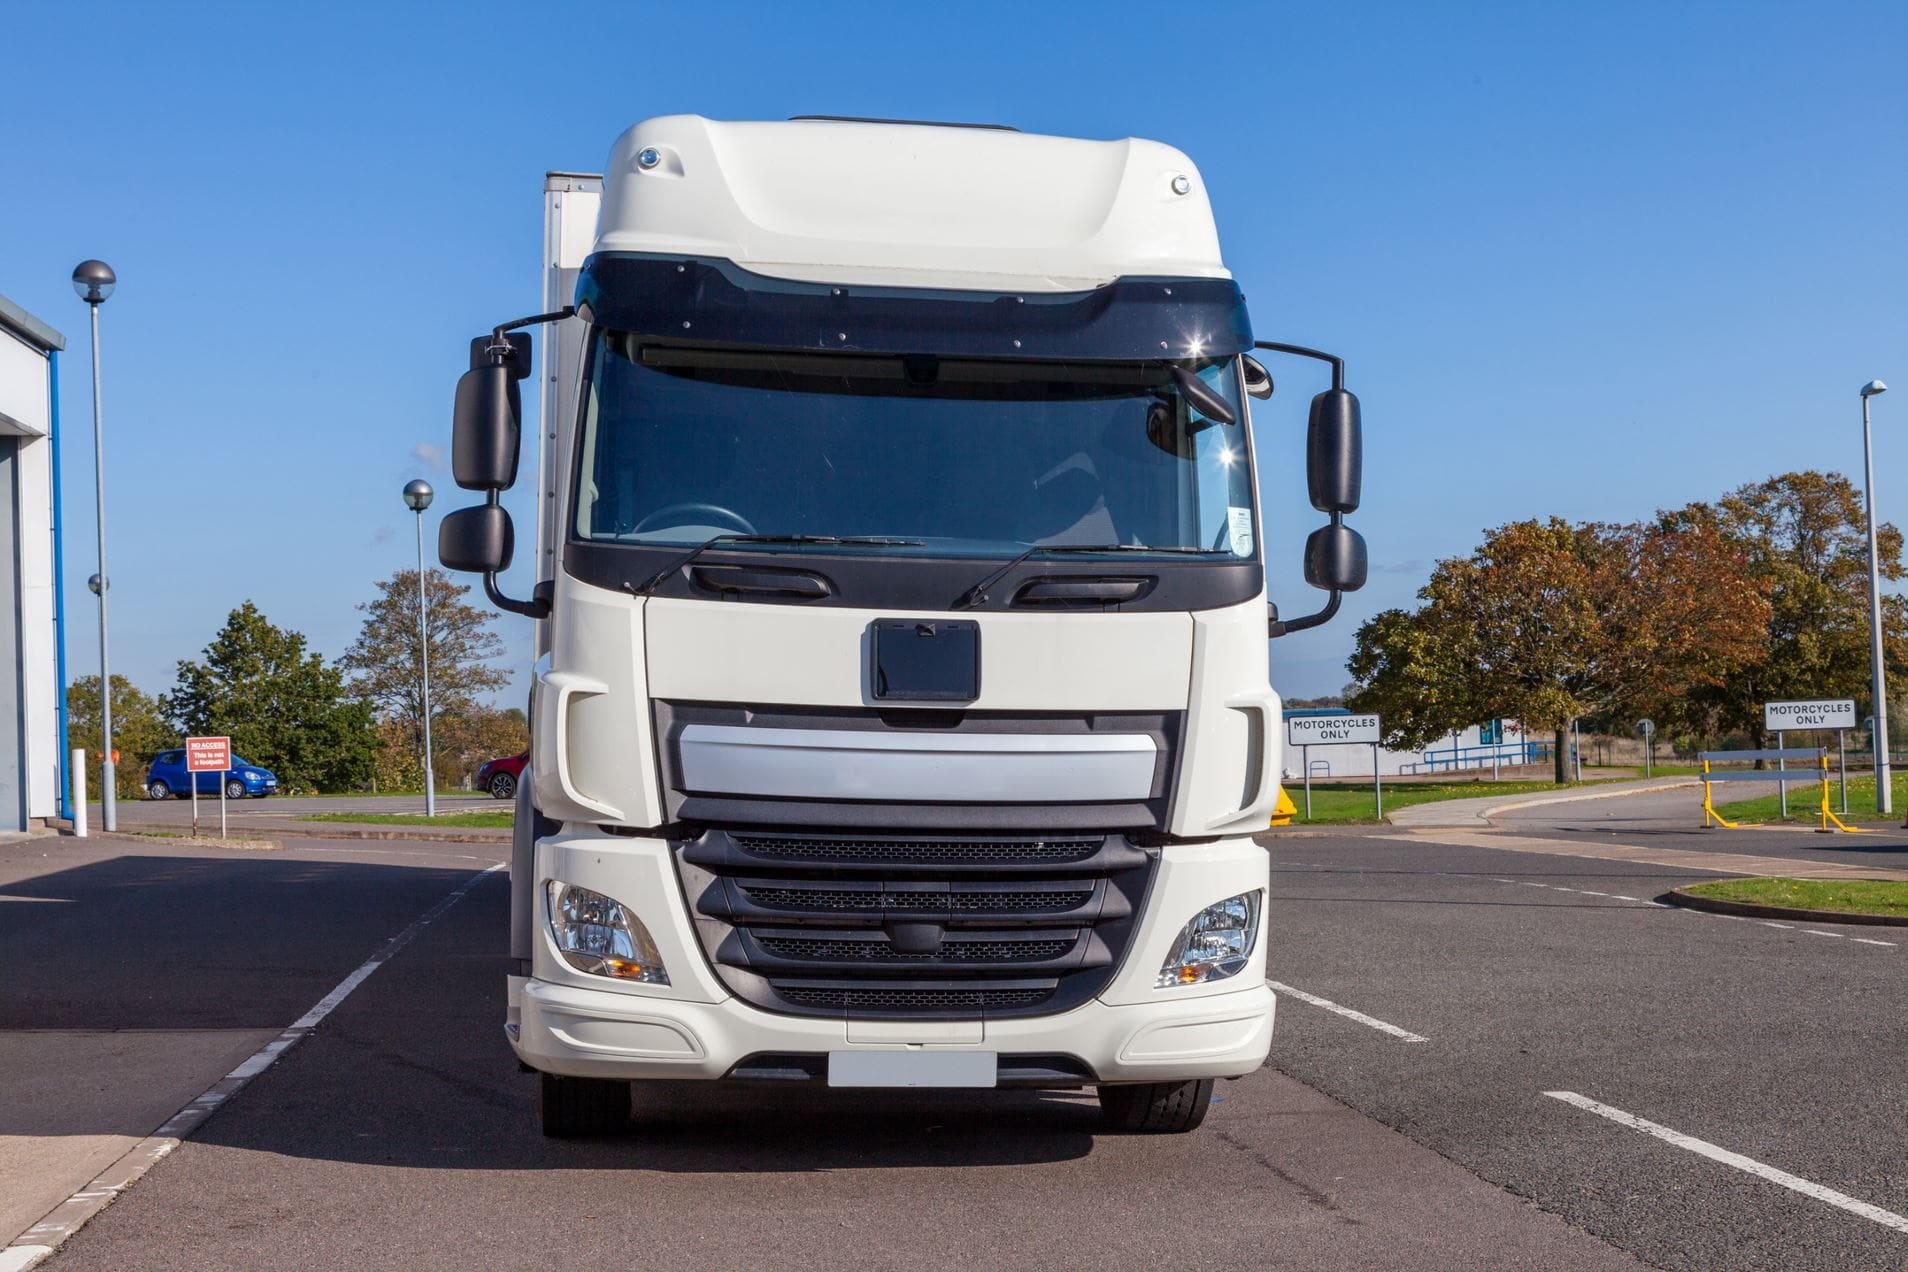 Moving to a digital first approach in heavy vehicle testing